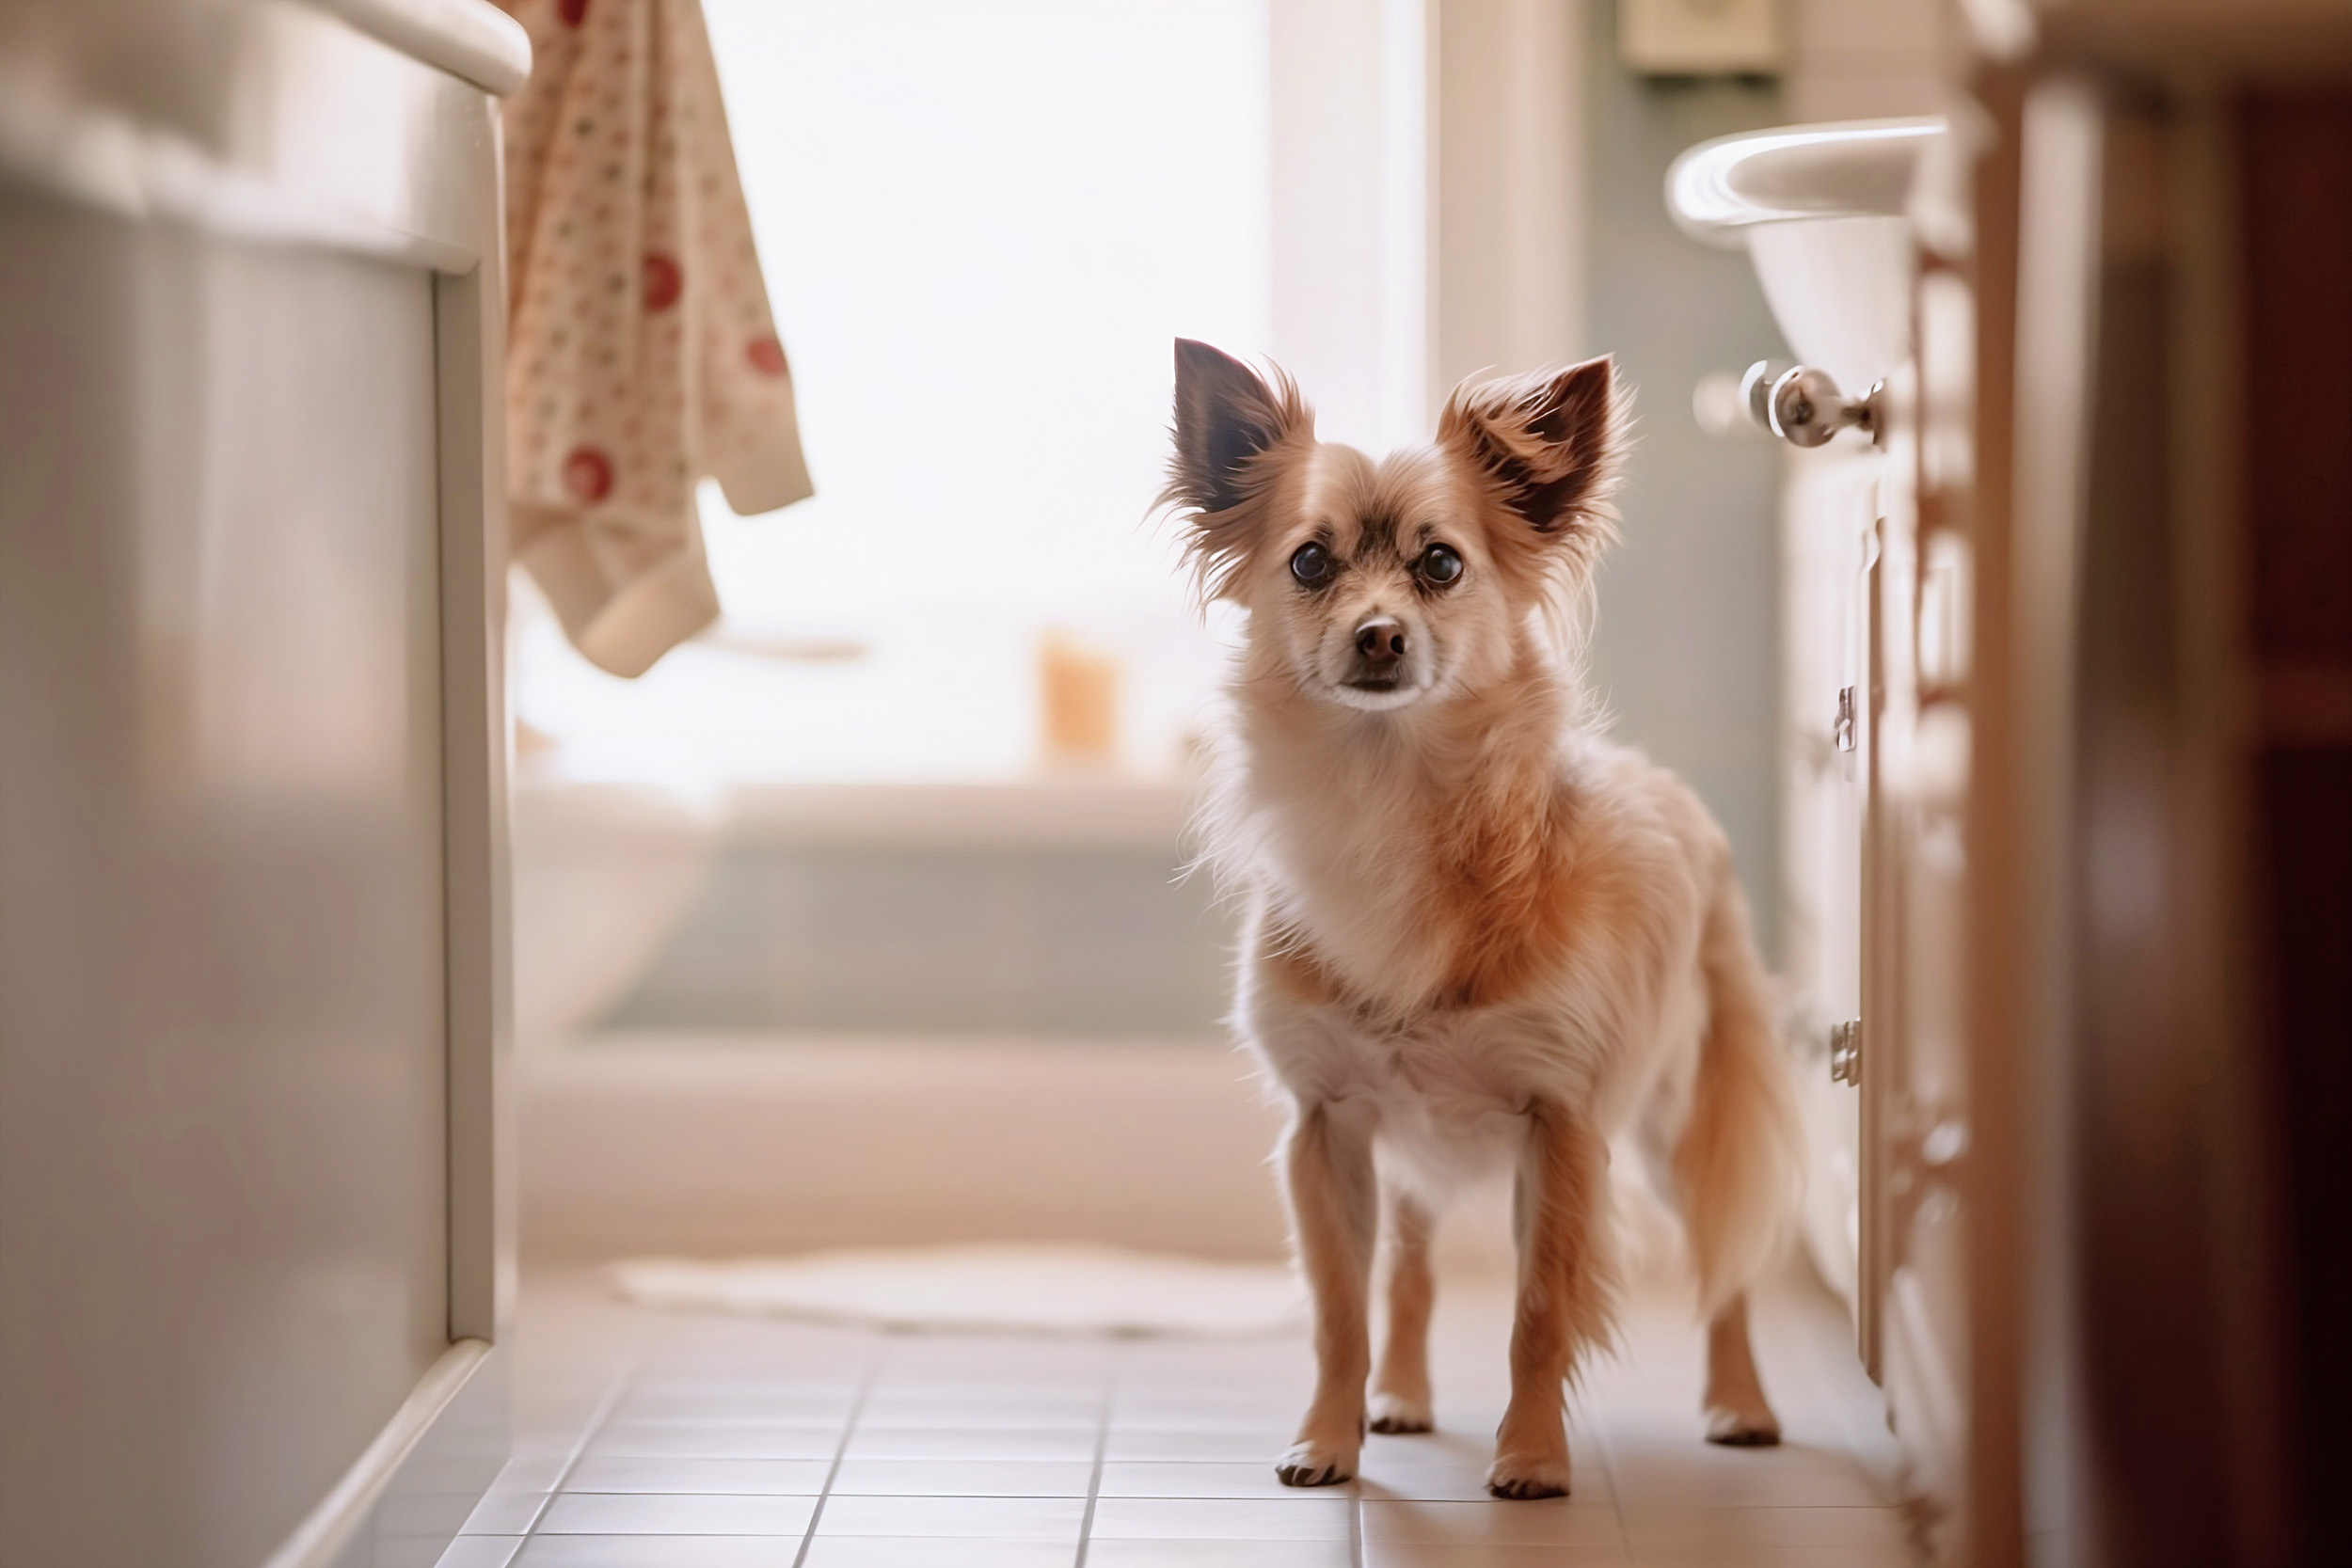 Dogs should be let outside to use the bathroom at least 3-4 times a day